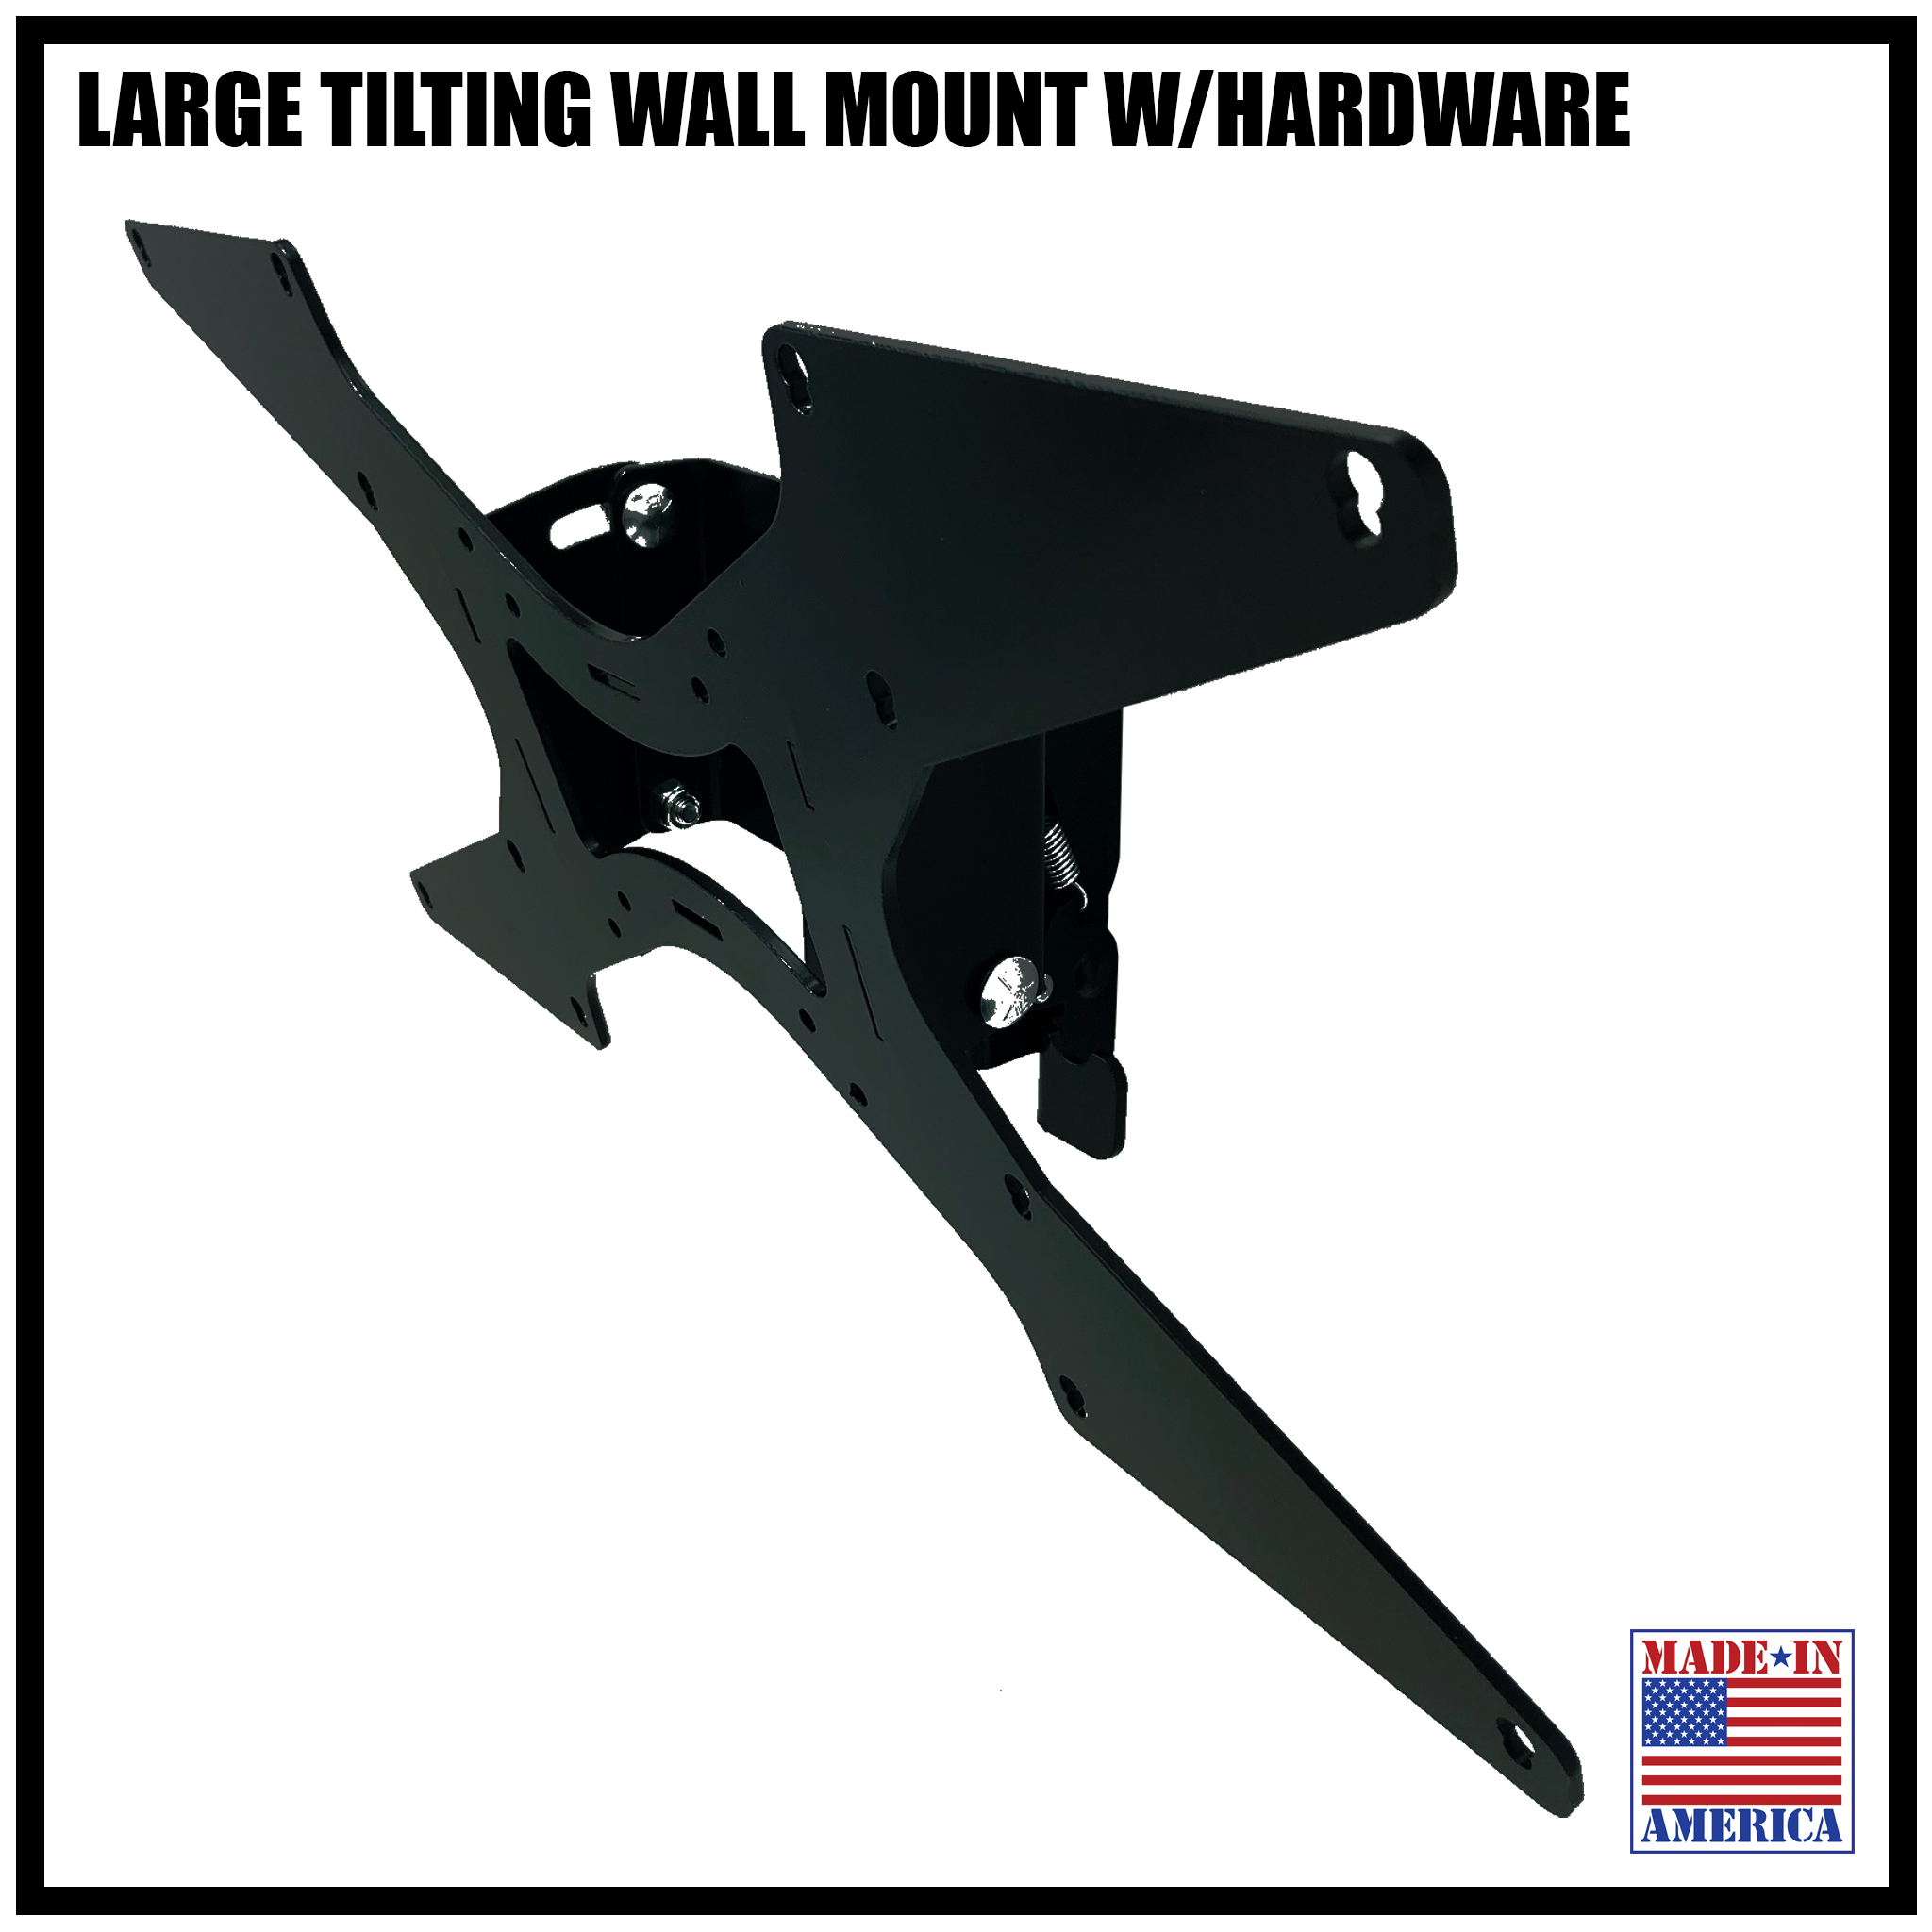 LARGE TILTING WALL MOUNT KIT (NO KEBLOC INCLUDED)